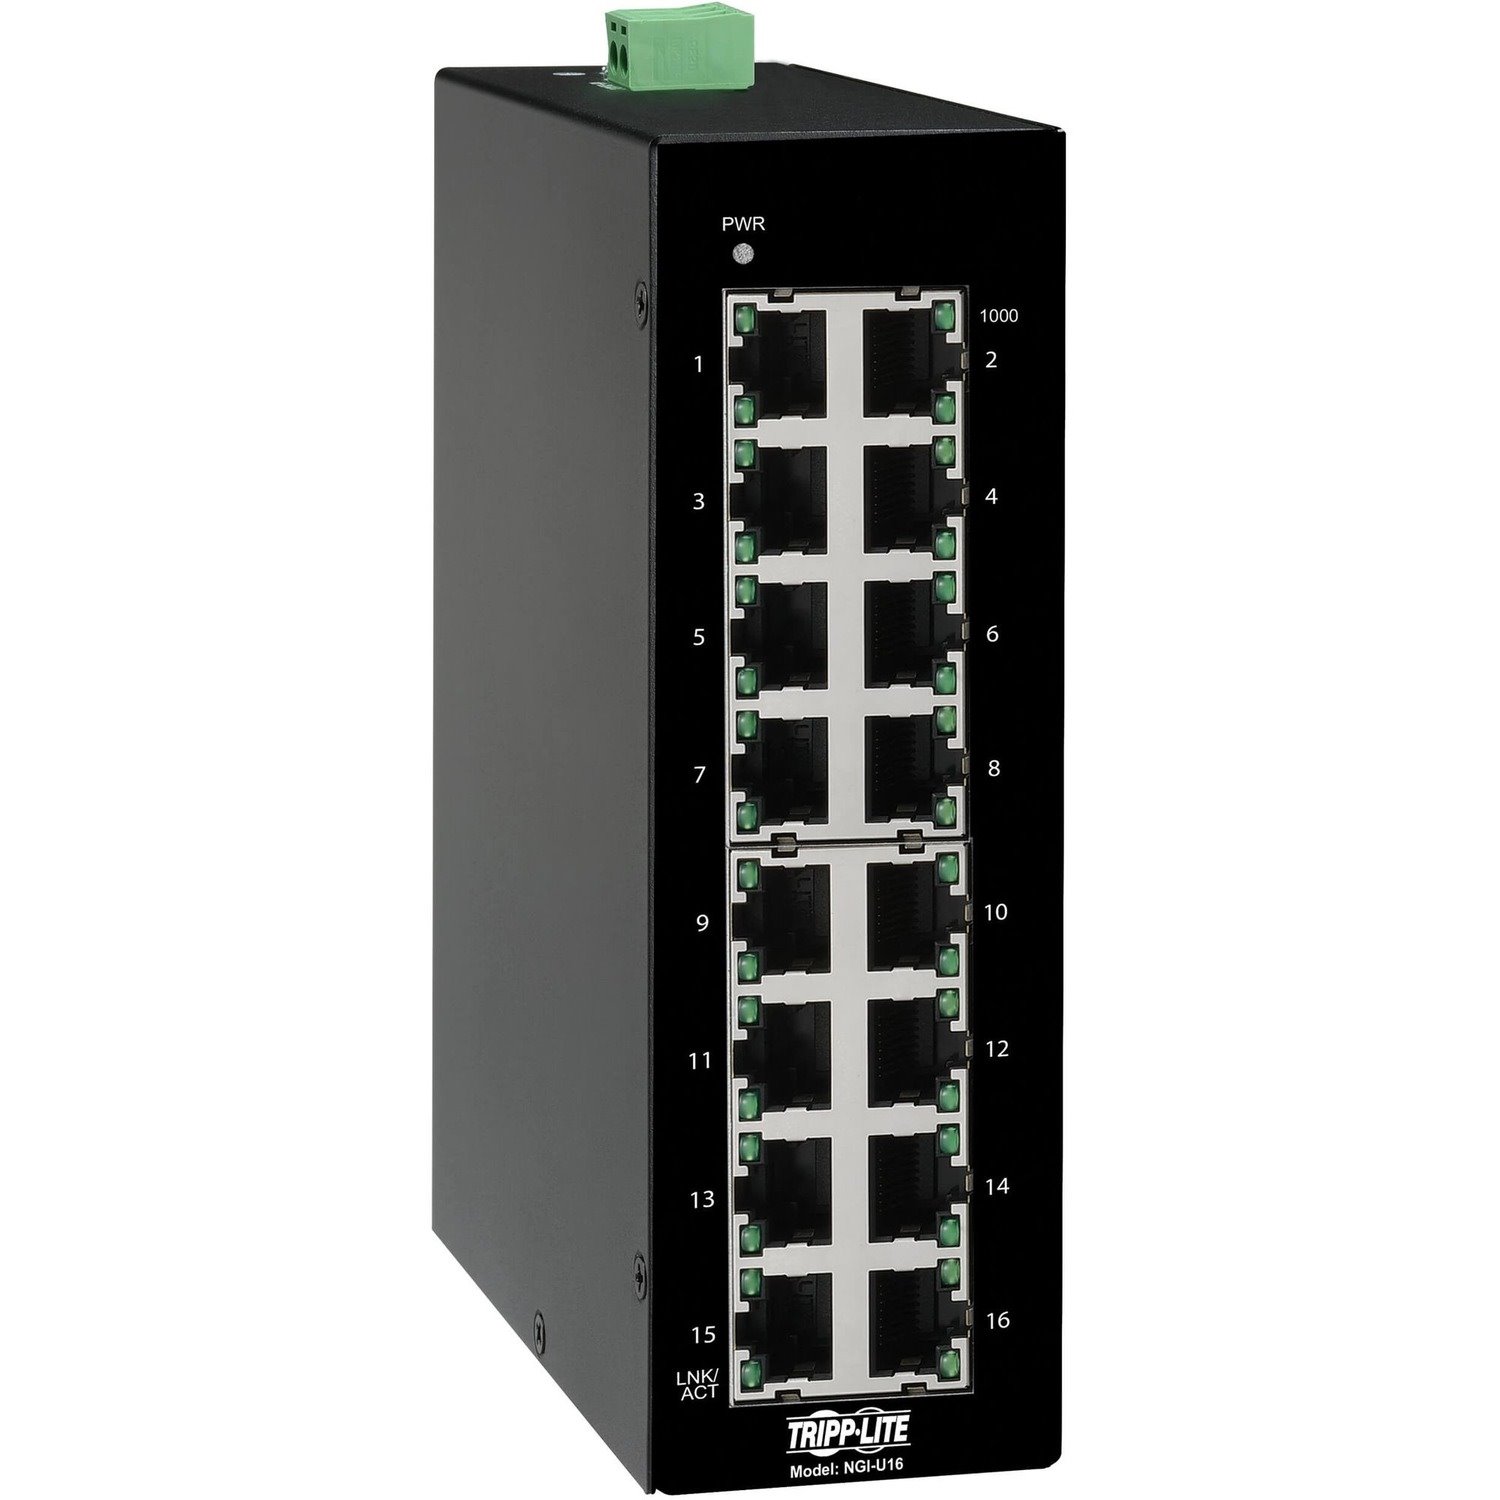 Eaton Tripp Lite Series 16-Port Unmanaged Industrial Gigabit Ethernet Switch - 10/100/1000 Mbps, DIN Mount, TAA